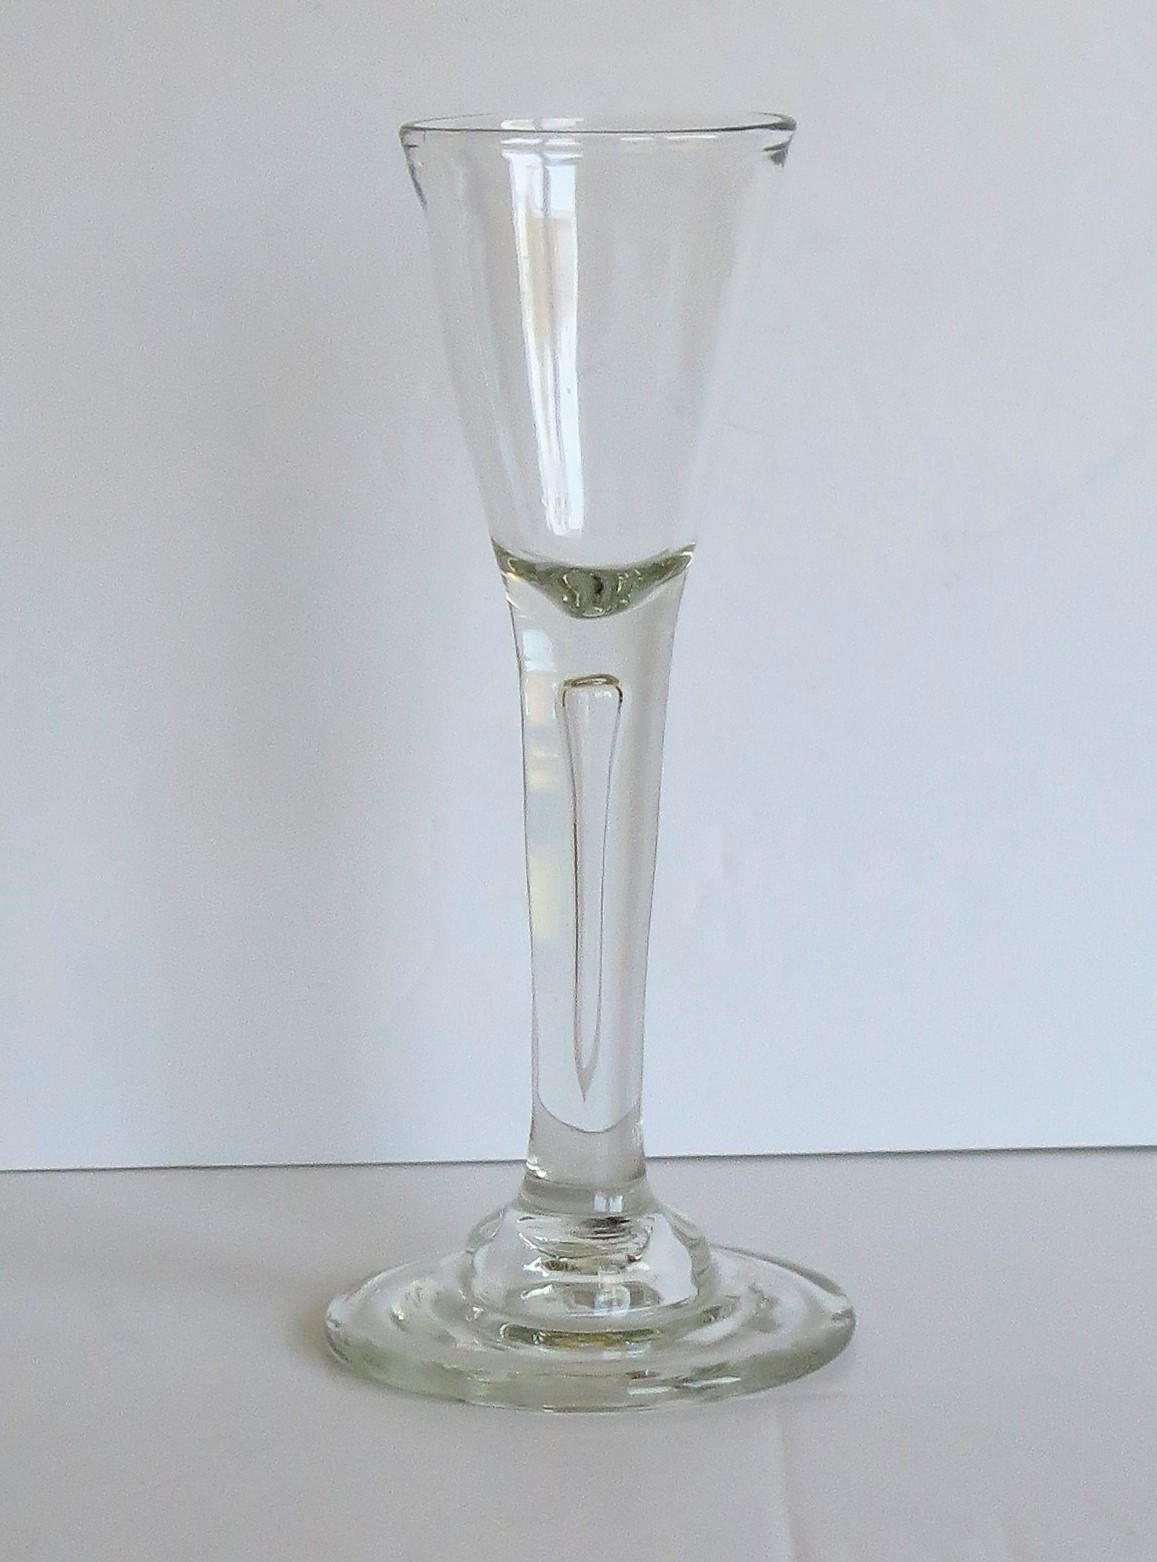 4 foot tall champagne glass